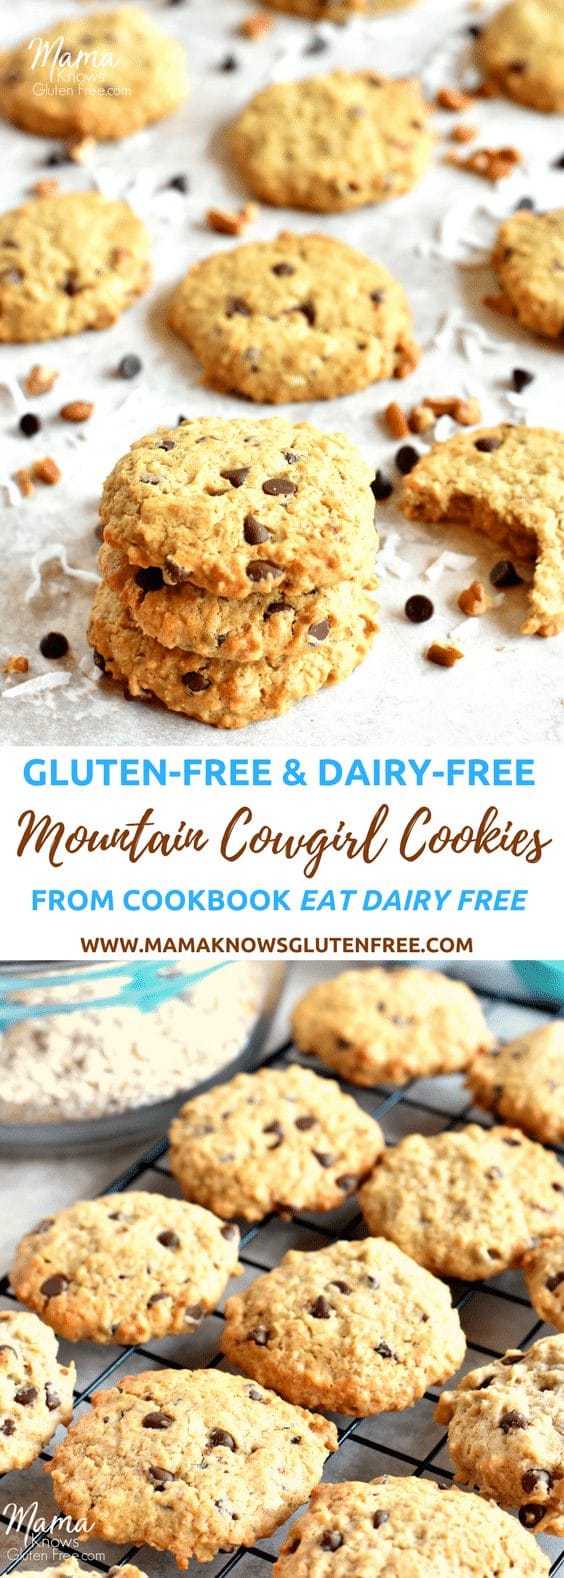 mountain cowgirl cookies from Eat Dairy Fee